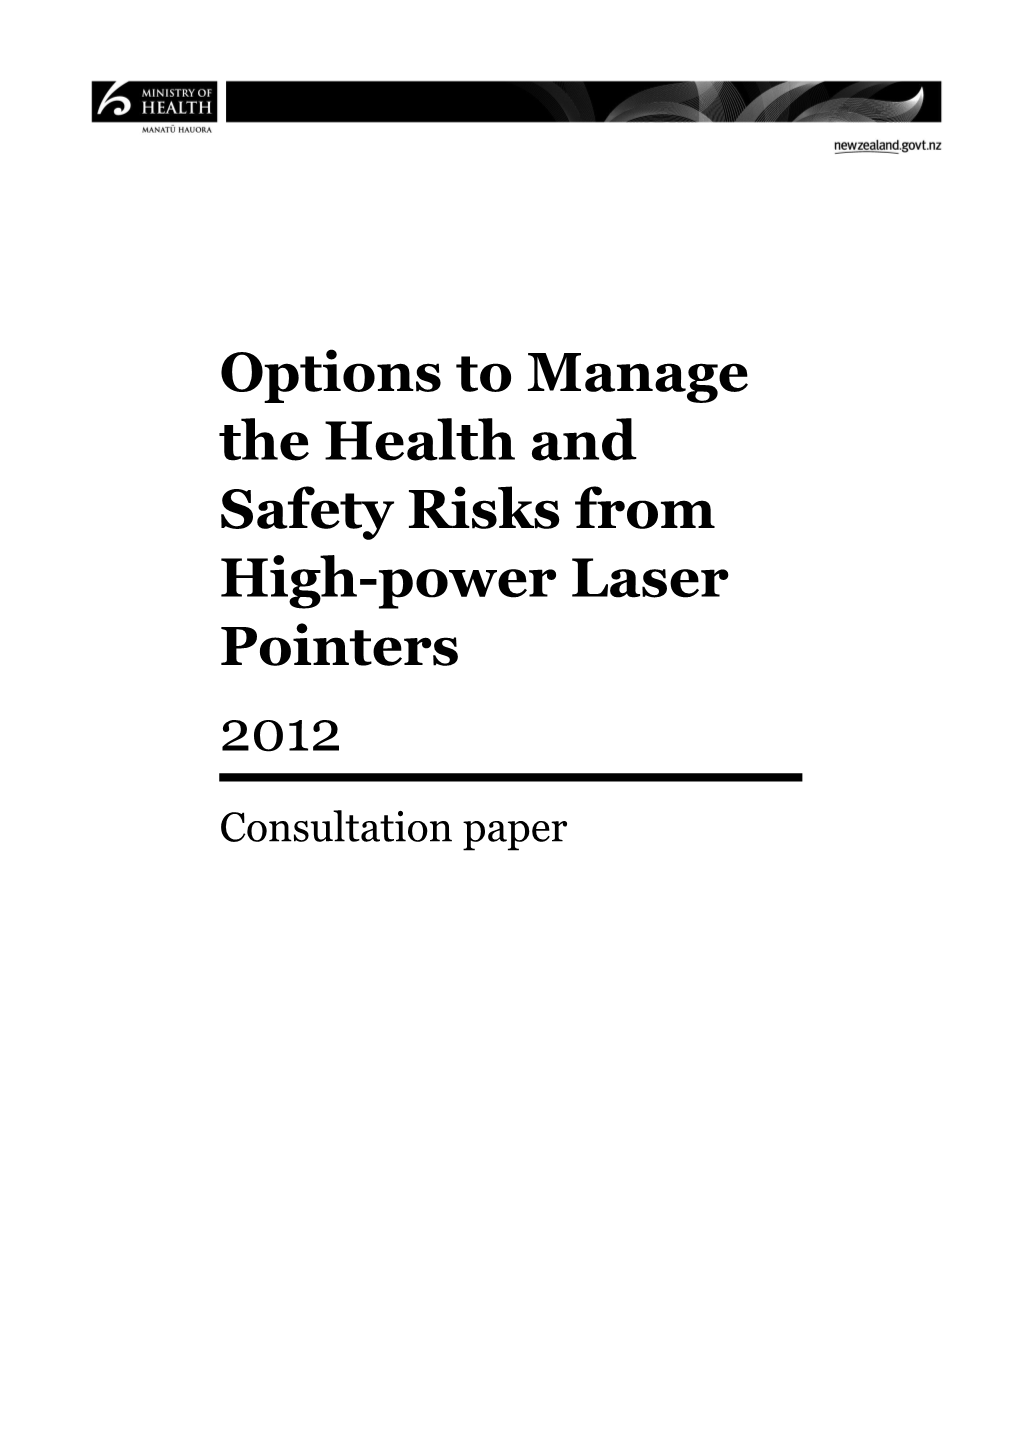 Options to Manage the Health and Safety Risks from High-Power Laser Pointers 2012: Consultation